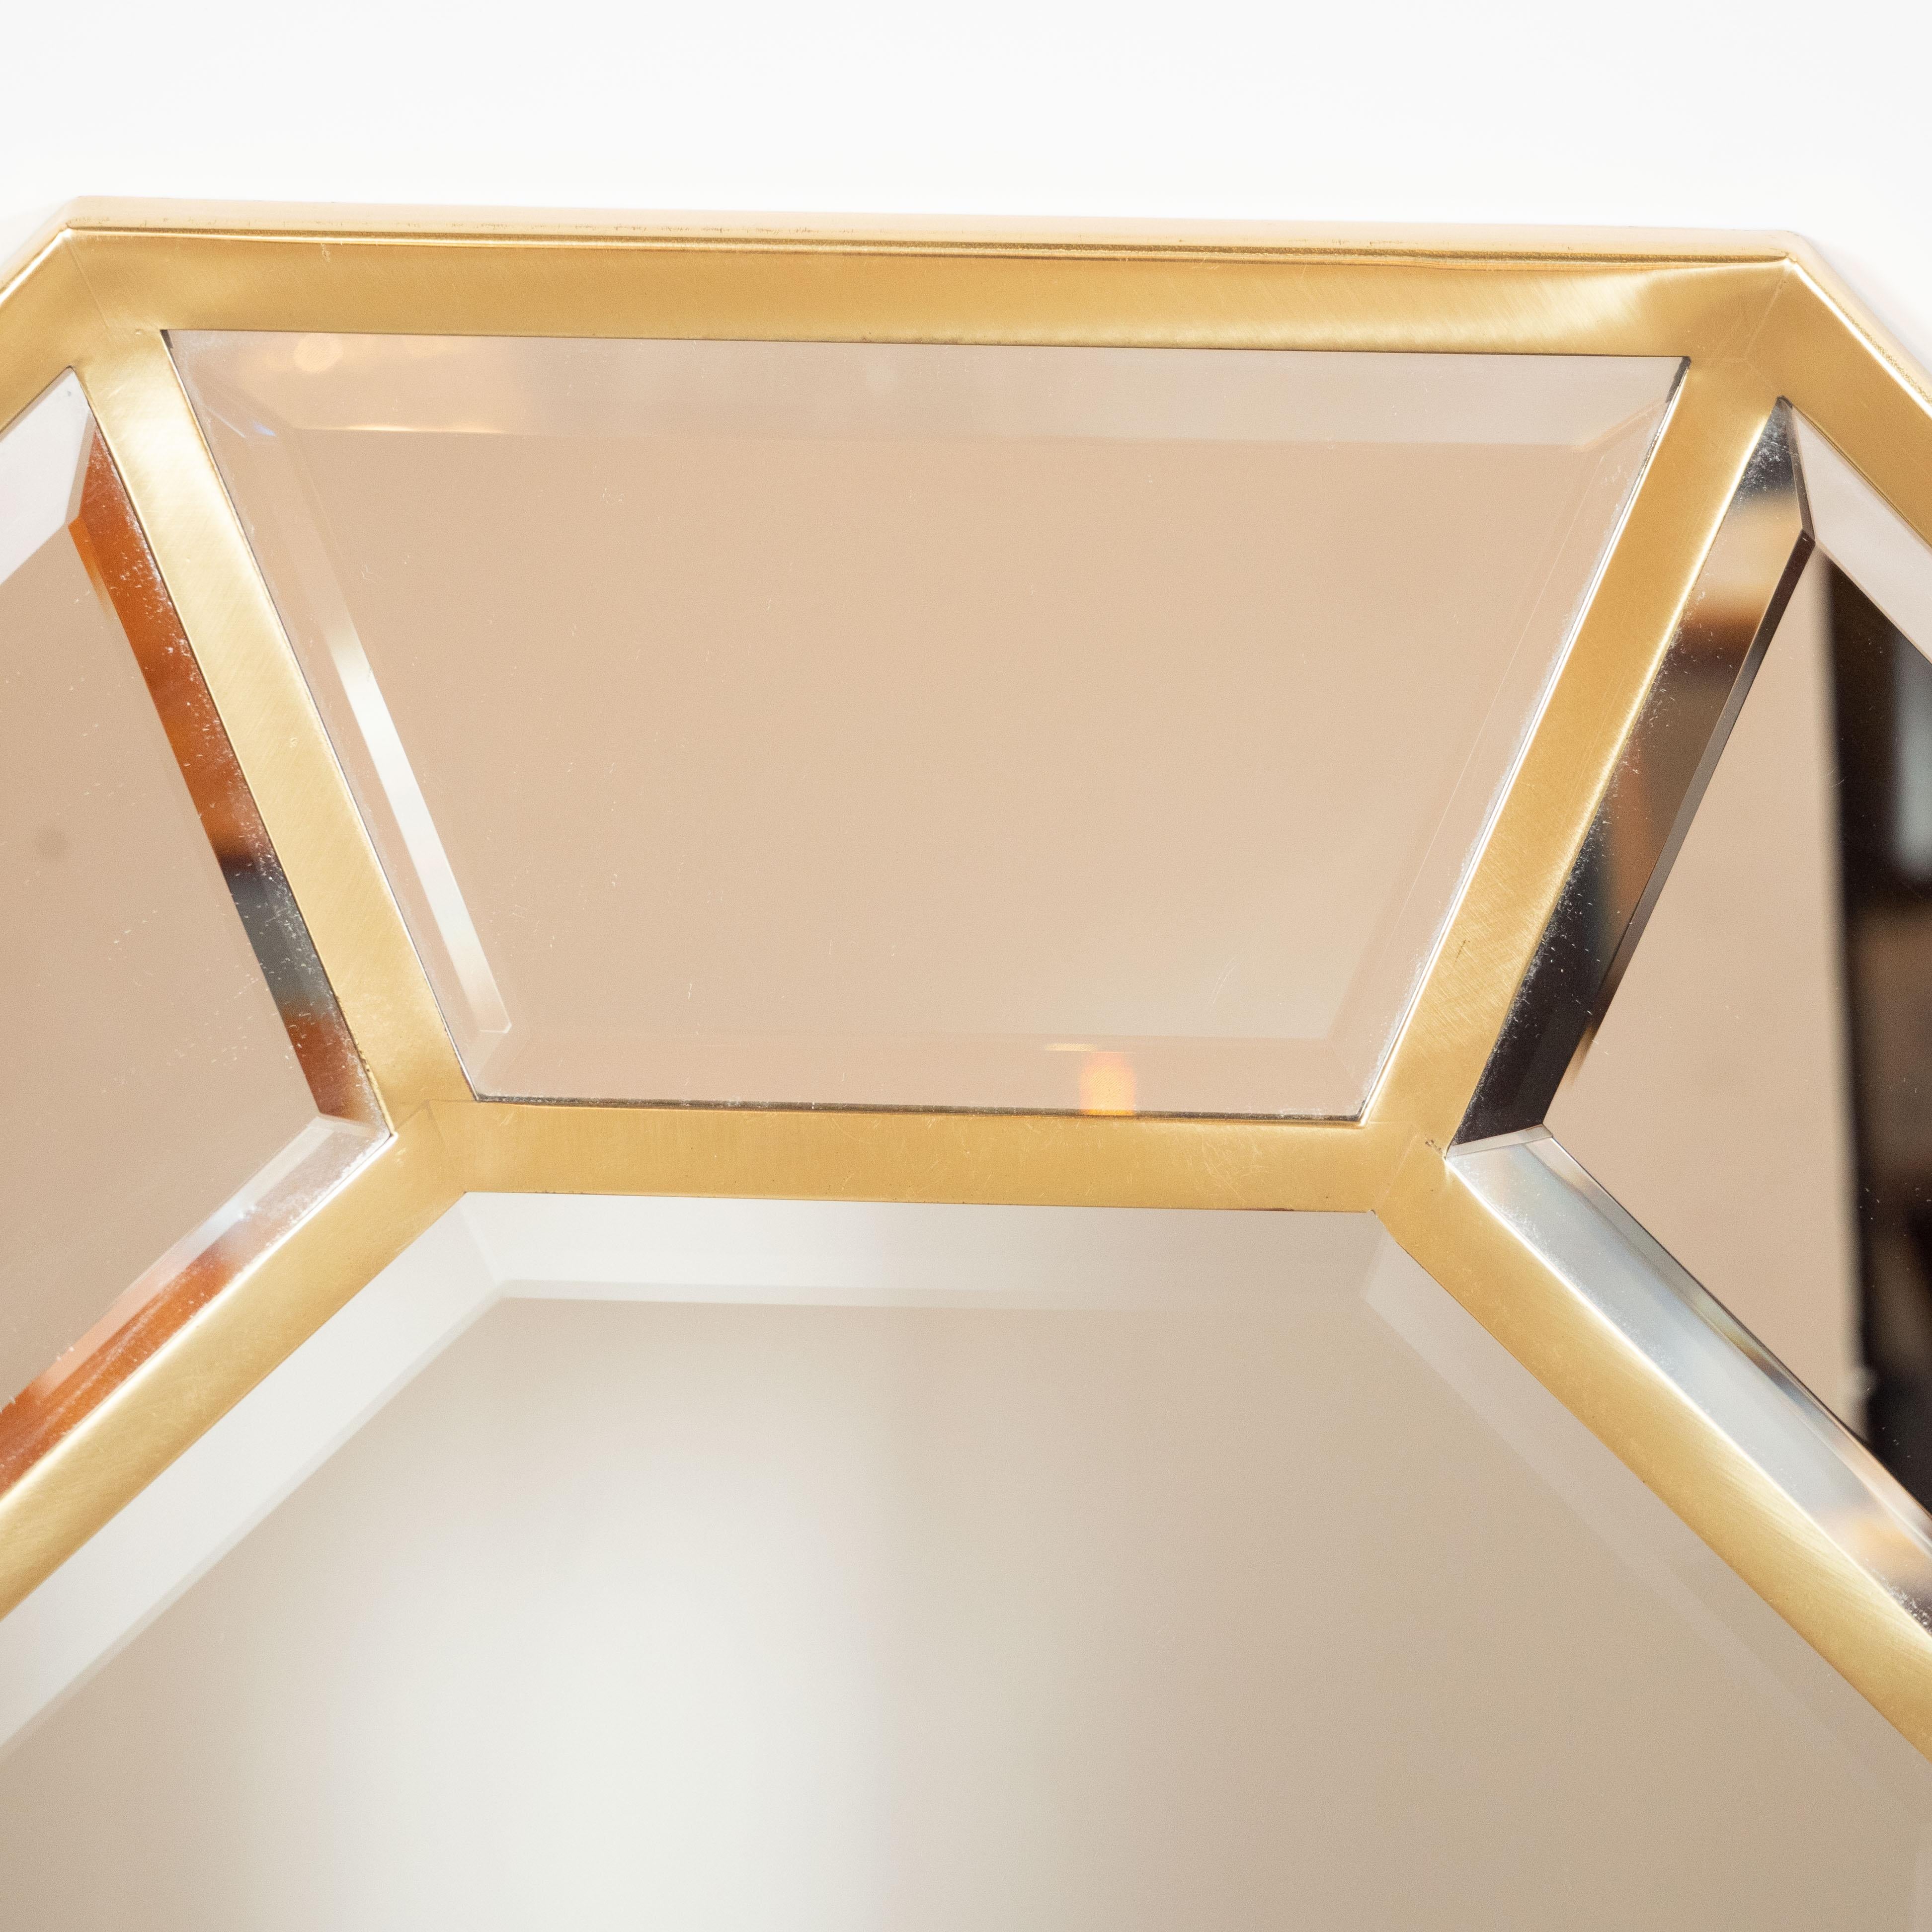 This refined mirror was realized in the United States, circa 1970. It features an octagonal silhouette- a form that is reiterated in the central mirrored panel surrounded by eight pentagonal inserts all framed in polished brass. With its clean